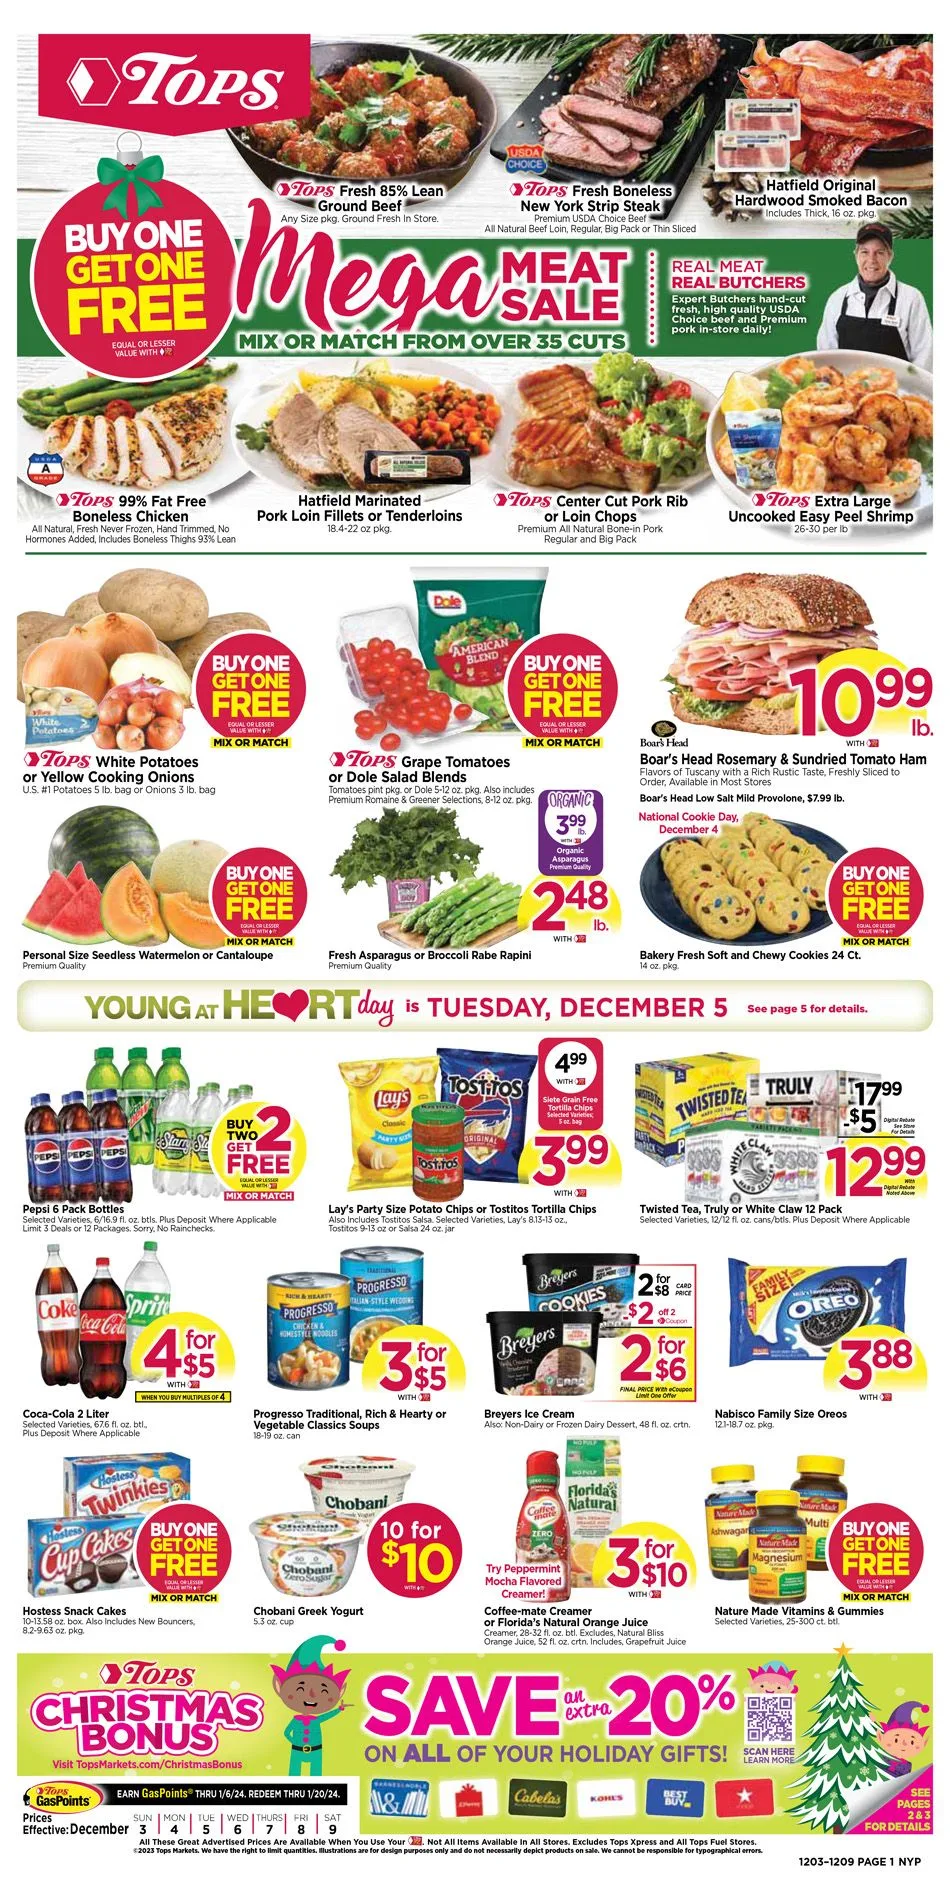 Tops Weekly Ad 12_3_23 pg 1